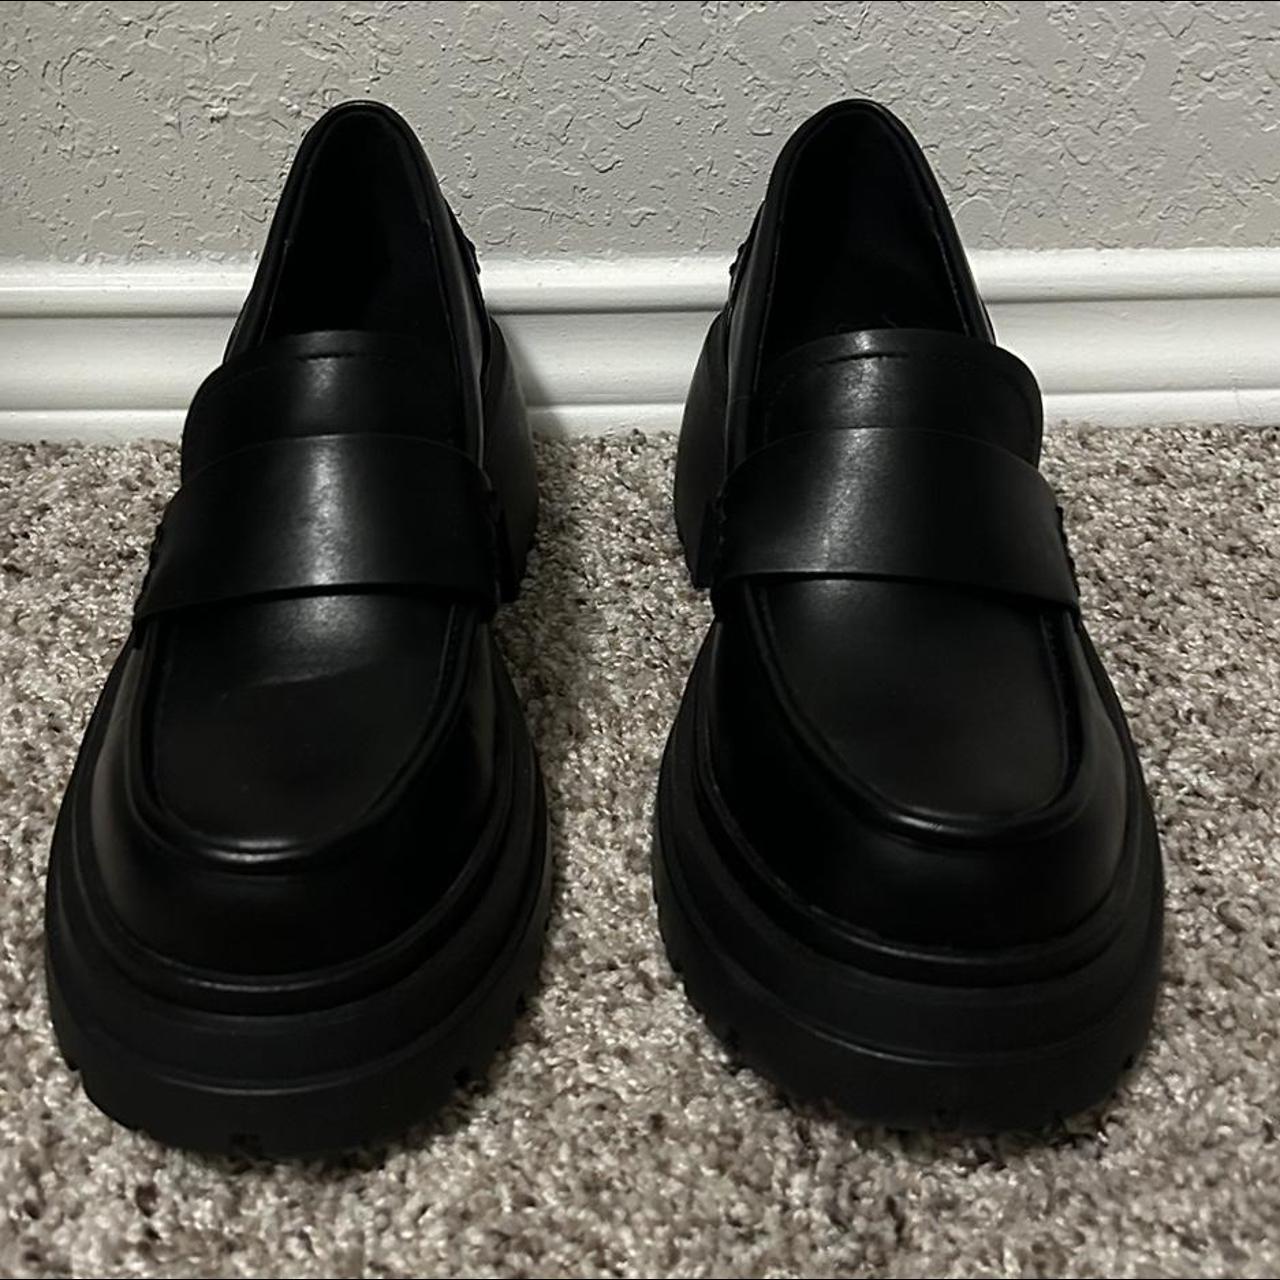 Platform loafers🖤 supposed to be size 8.5W but too... - Depop